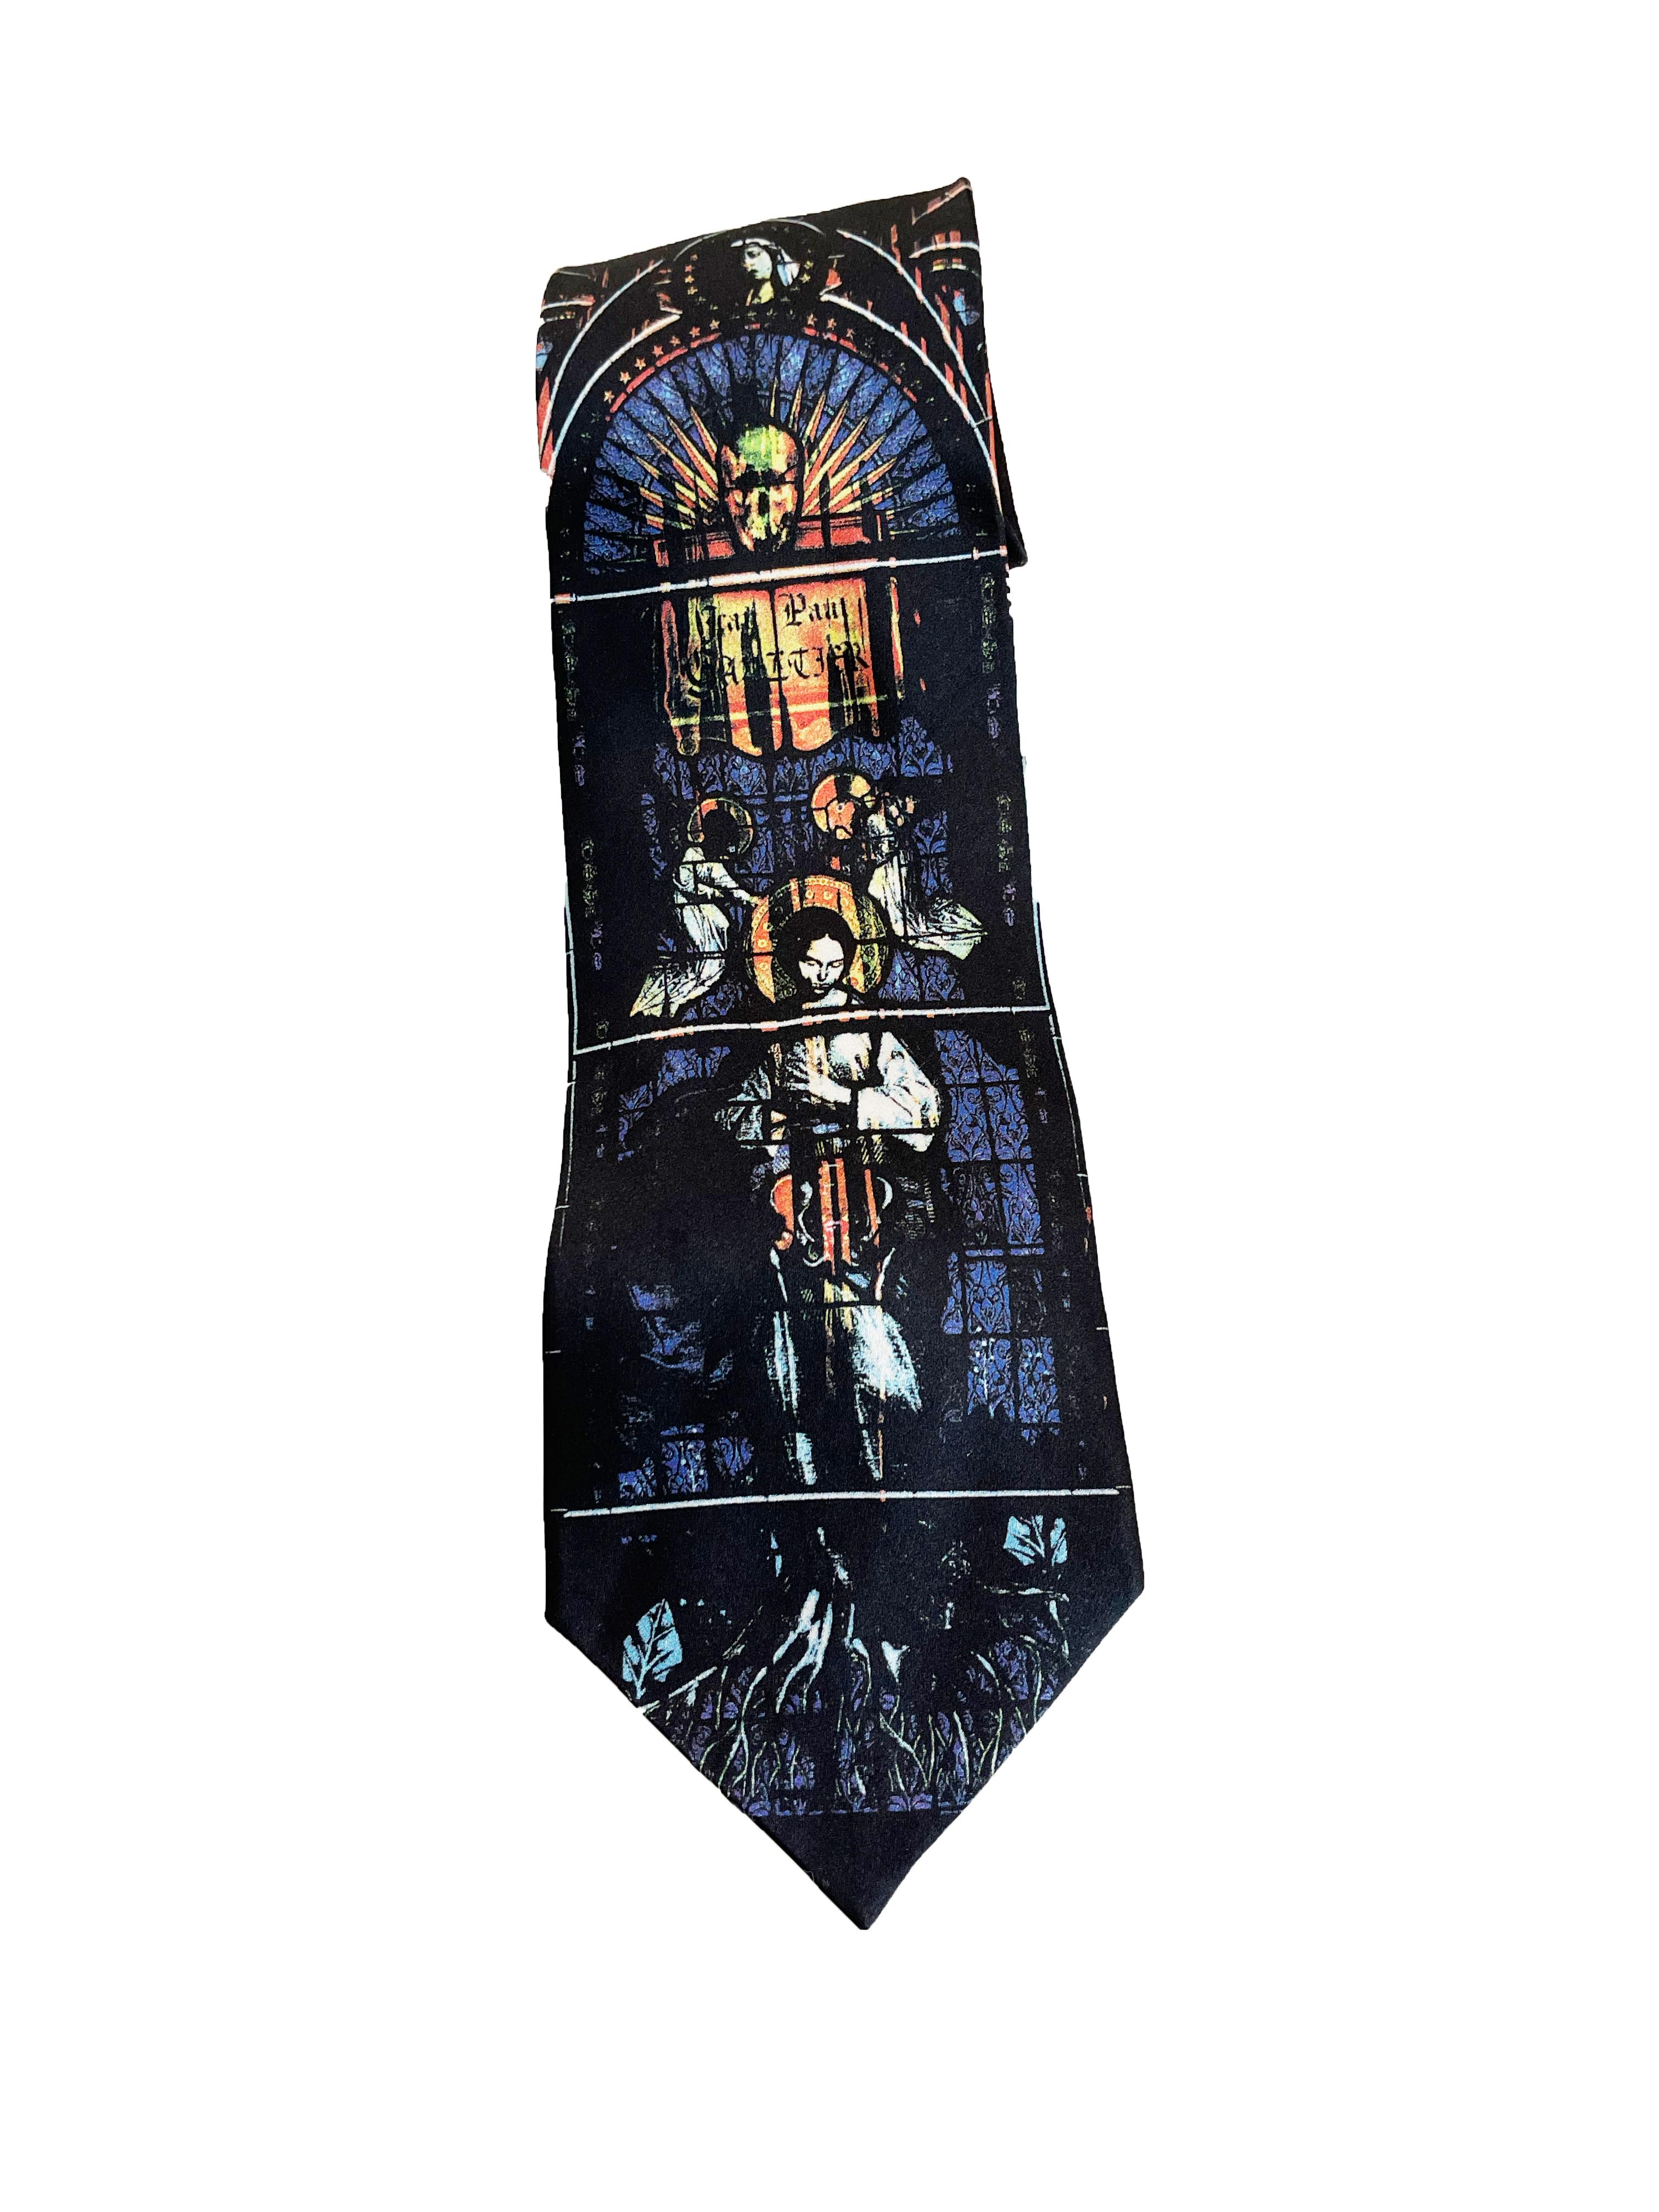 1990s Jean Paul Gaultier Stained Glass Tie
Condition: Excellent

